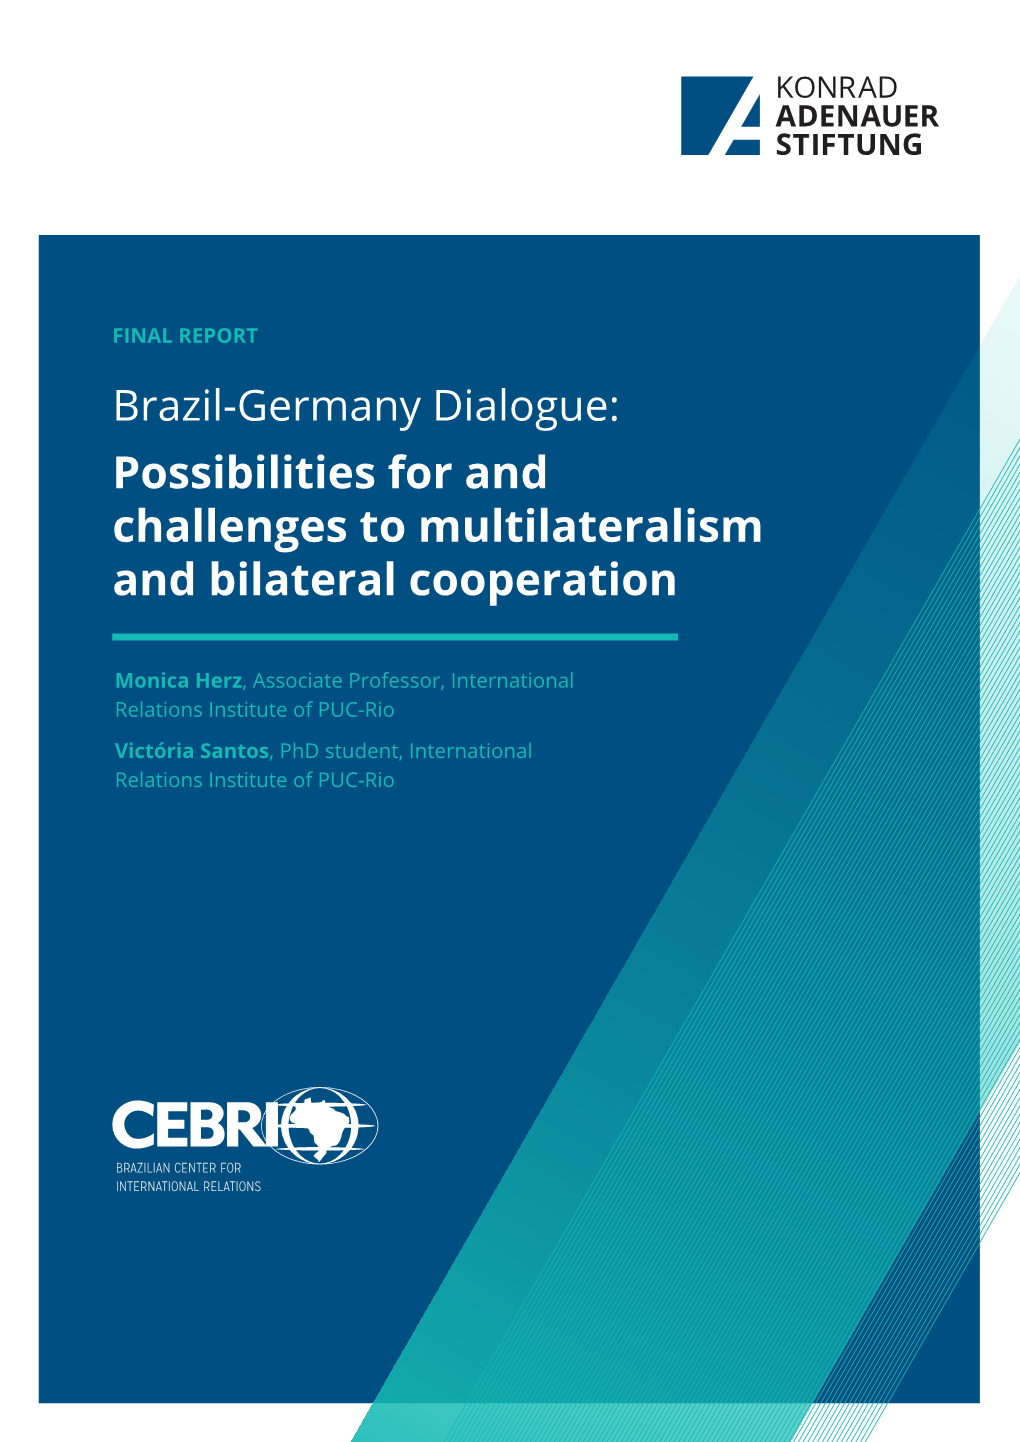 Possibilities for and Challenges to Multilateralism and Bilateral Cooperation